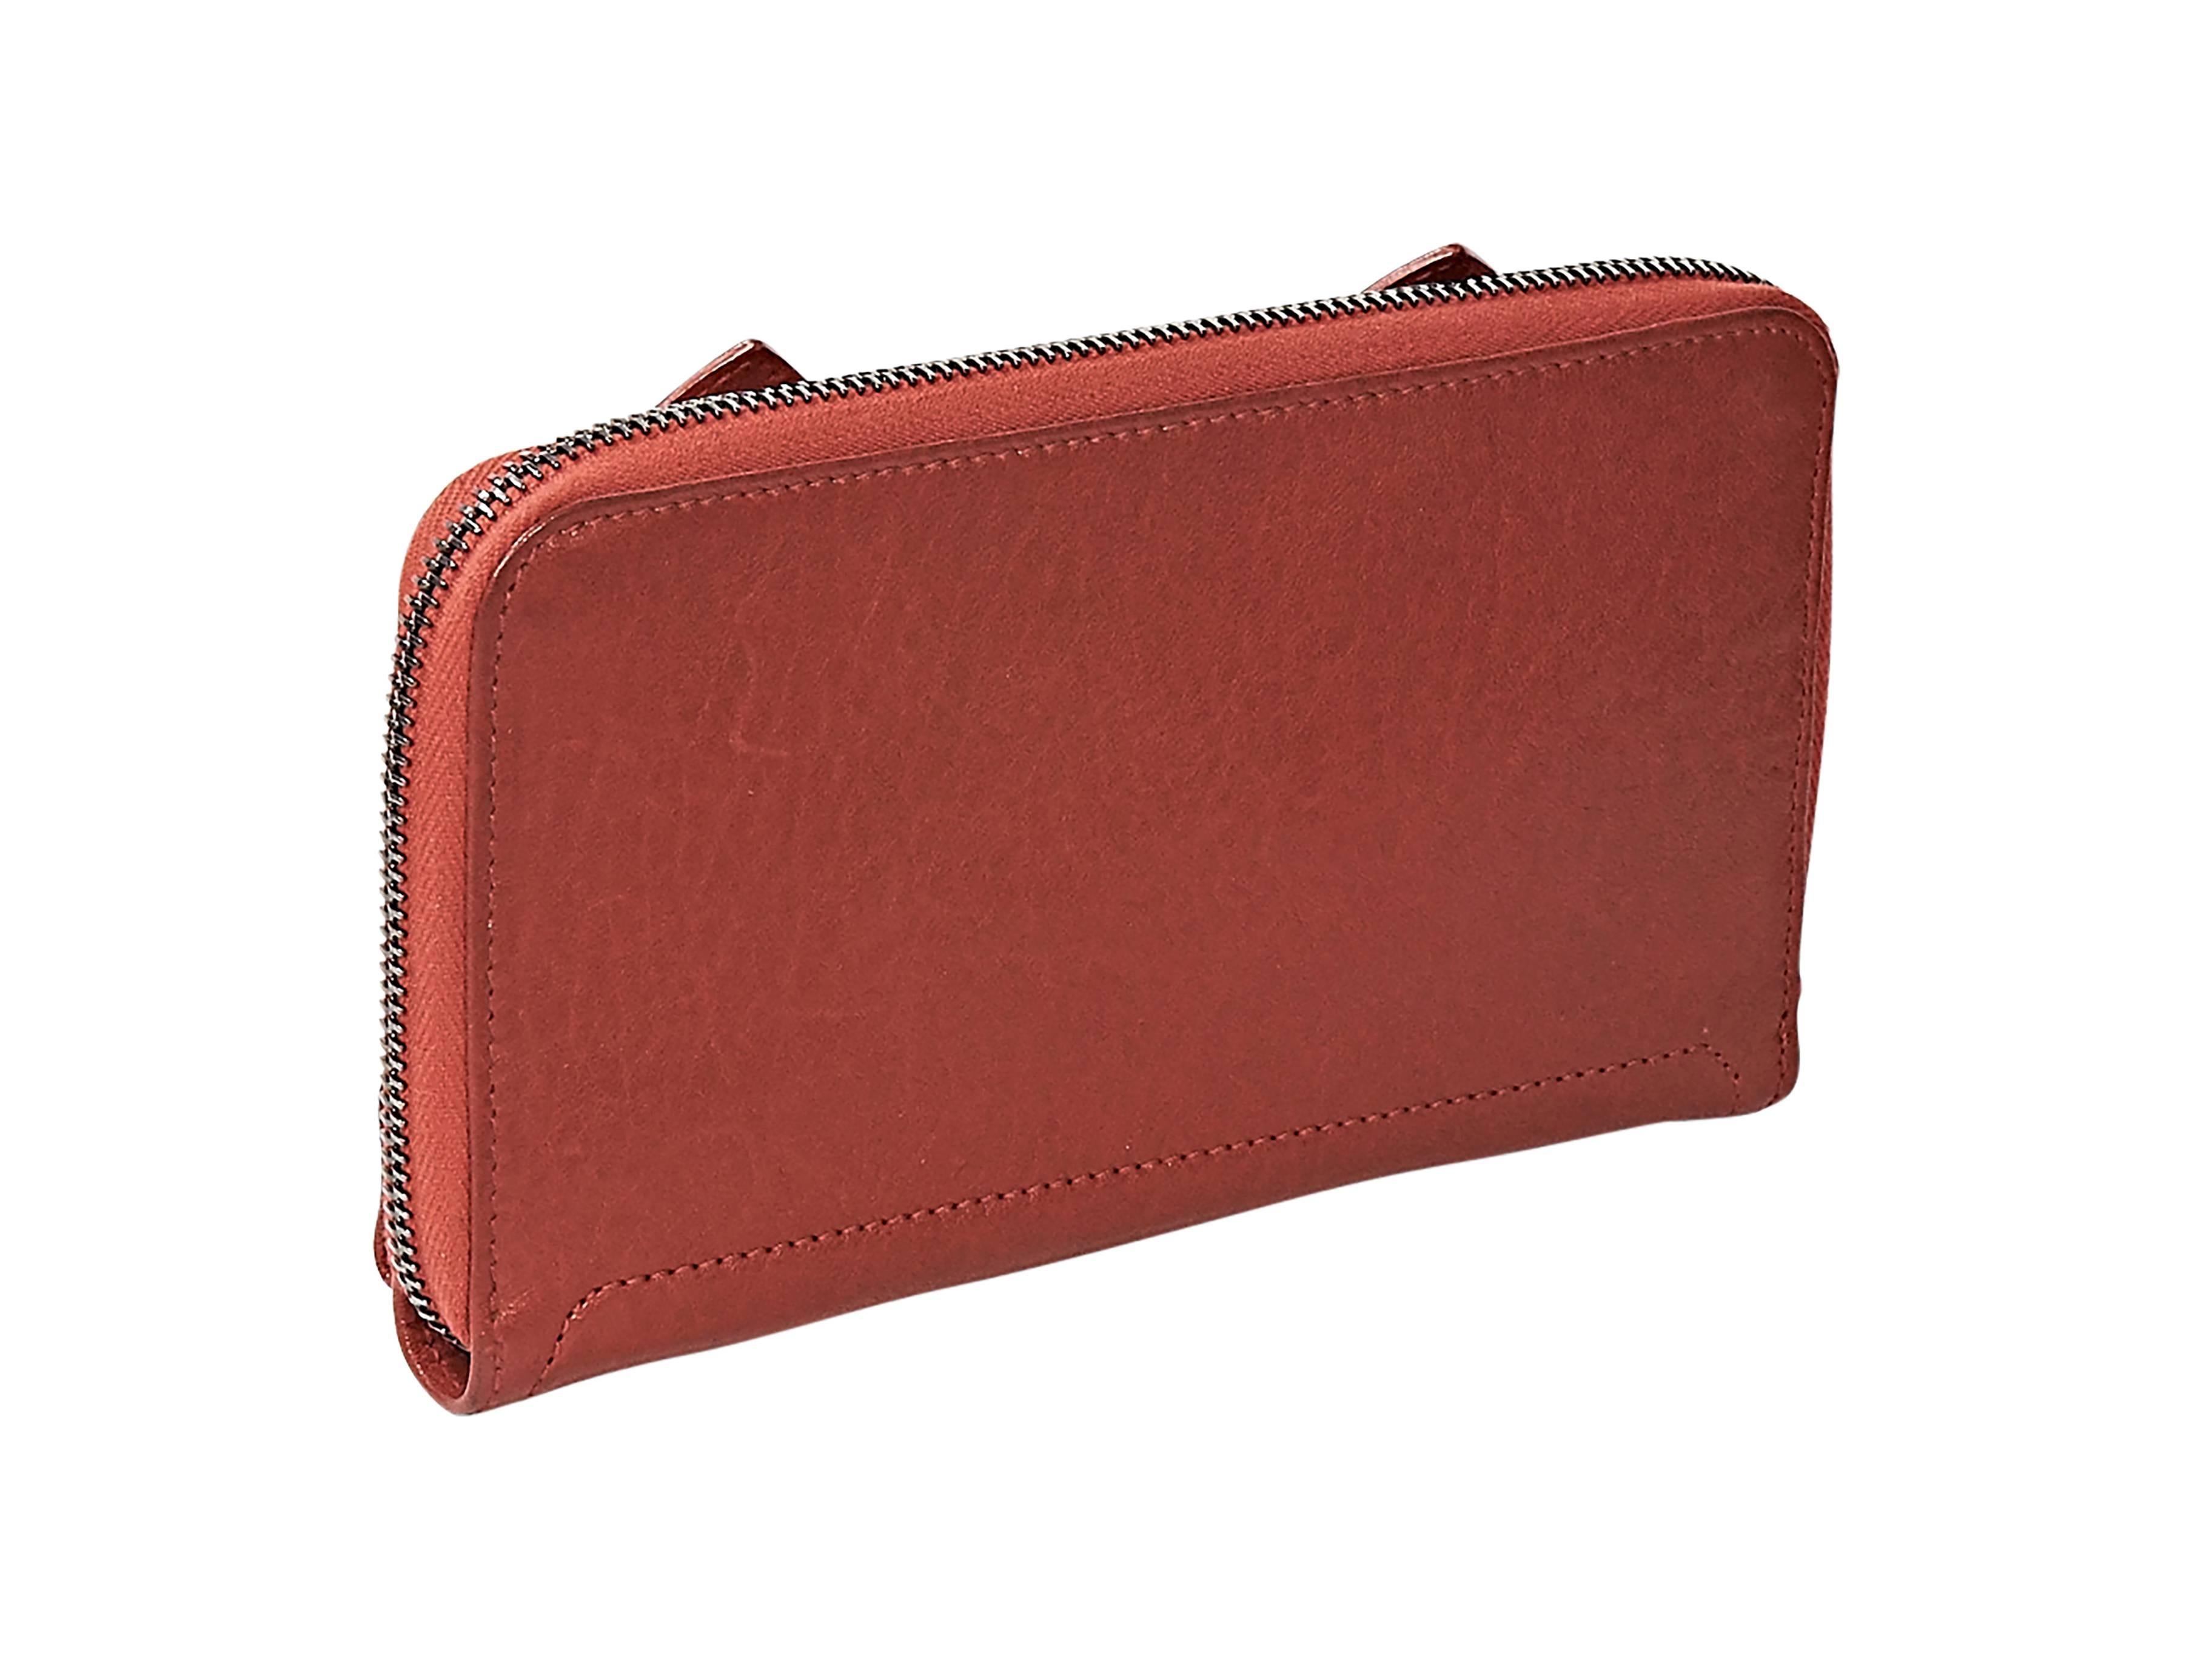 Product details:  Red leather PS1 wallet by Proenza Schouler.  Front flap with snap closure and belted straps.  Zip-around closure.  Multiple credit card slots and coin pouch.  ﻿7.25